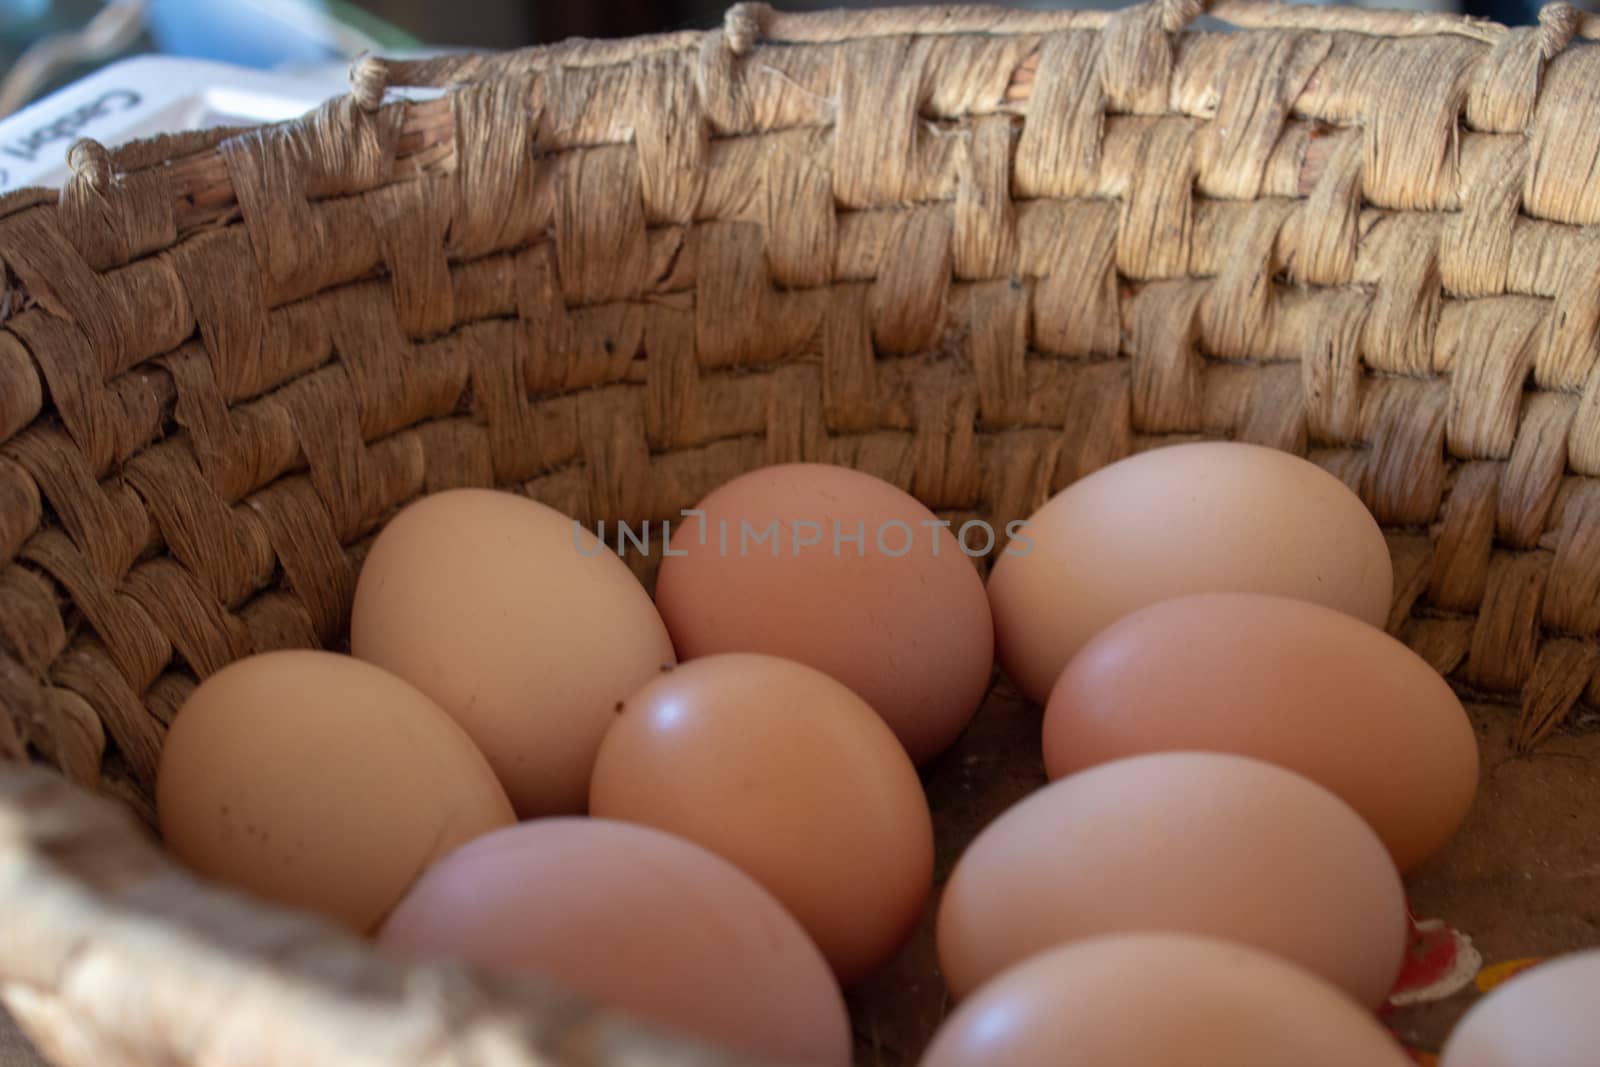 A hay basket full of red eggs